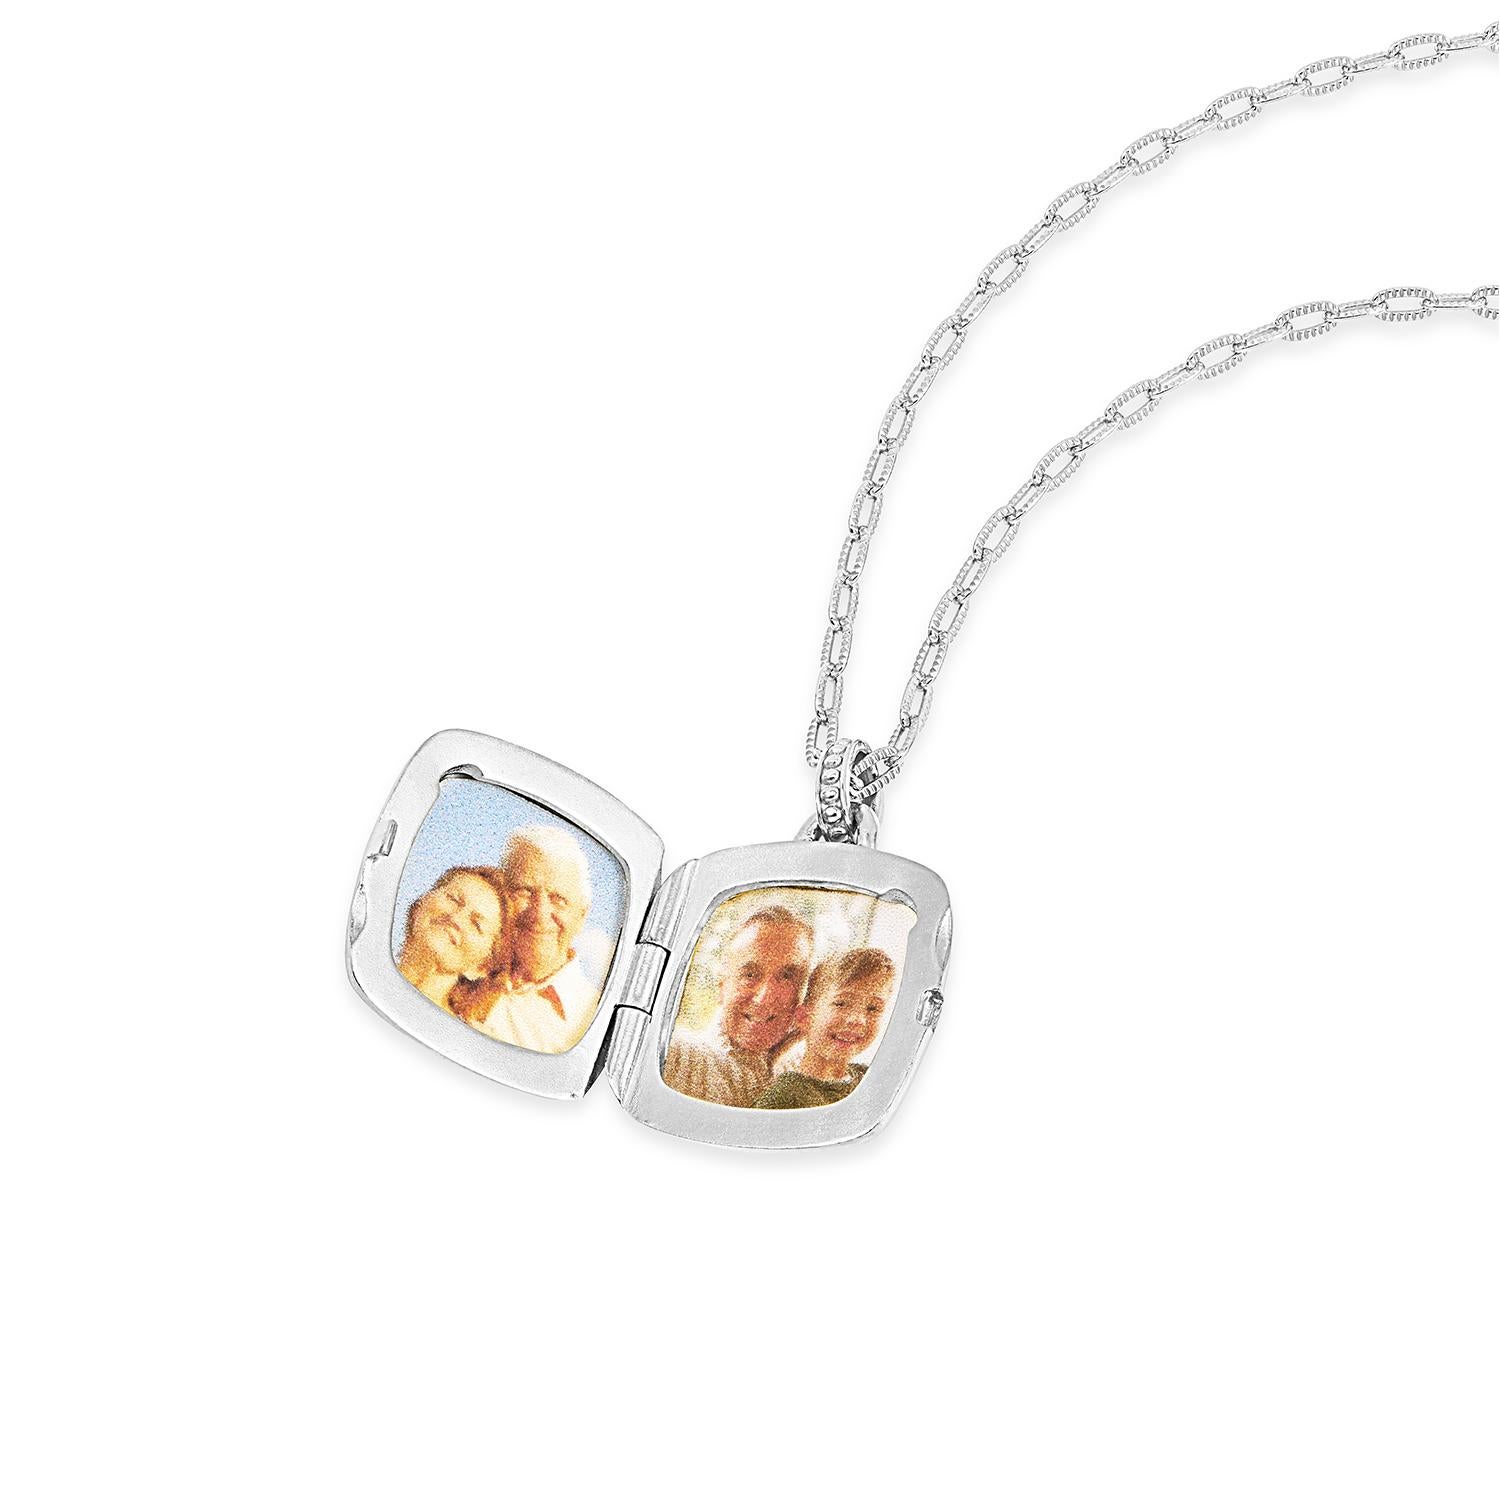 Cherish your treasured memories with our distinctive sterling silver 'Stellar' locket. The cushion-shape design features an intricately carved star inside an engraved frame, with a sparkling white sapphire set in the centre. The locket is suspended